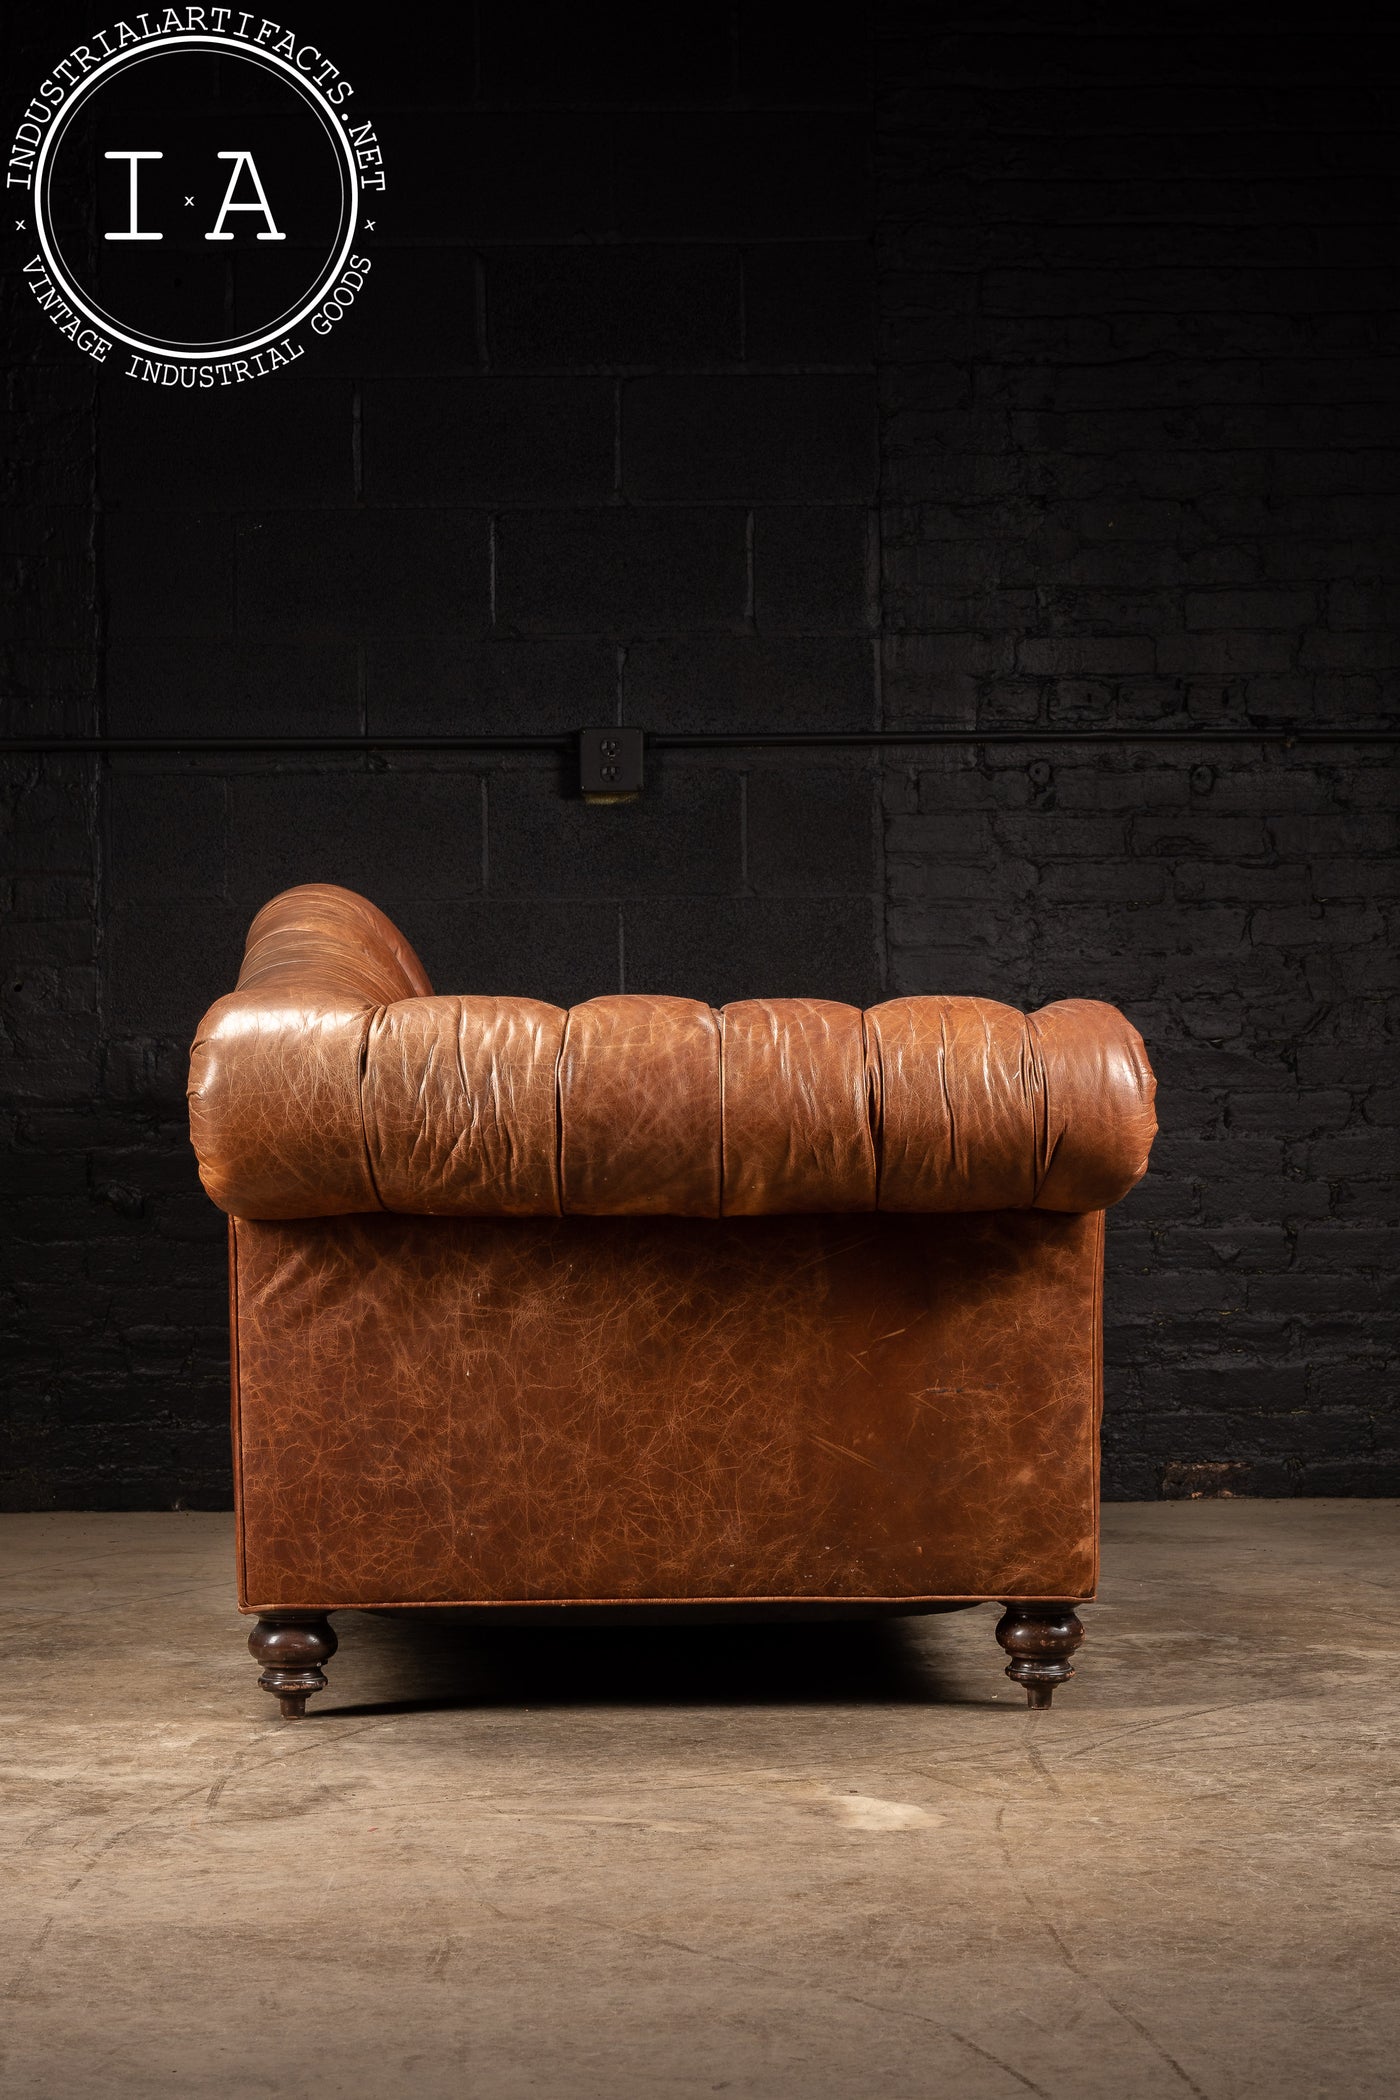 Vintage Tufted Leather Sofa In Brown